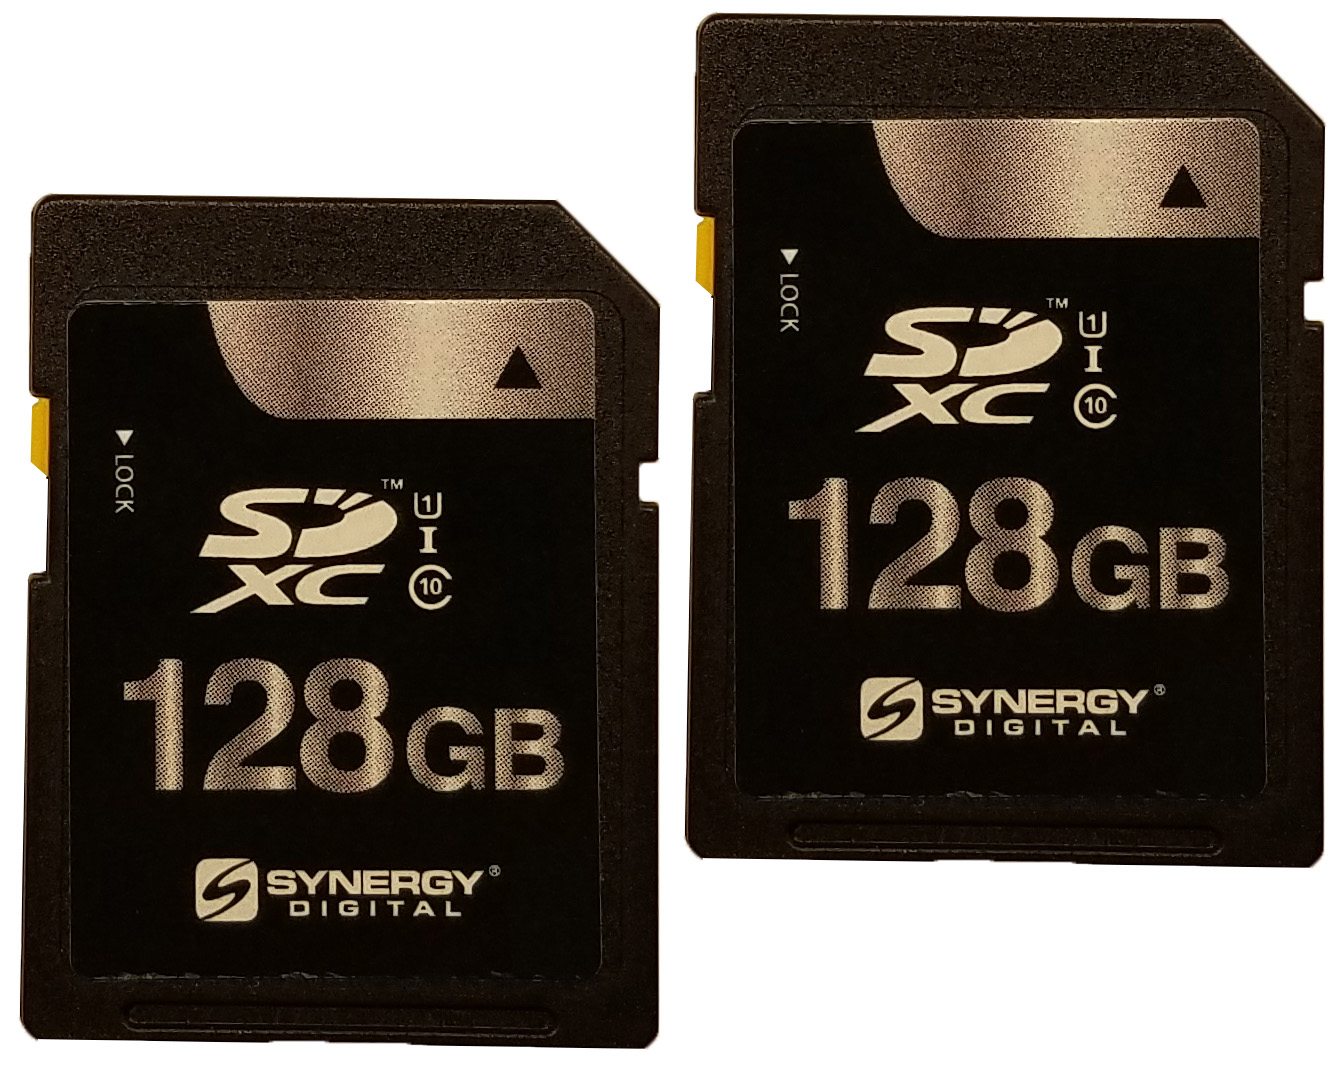 2 x 128GB Secure Digital Class 10 Extreme Capacity (SDXC) Memory Card (2 Pack)